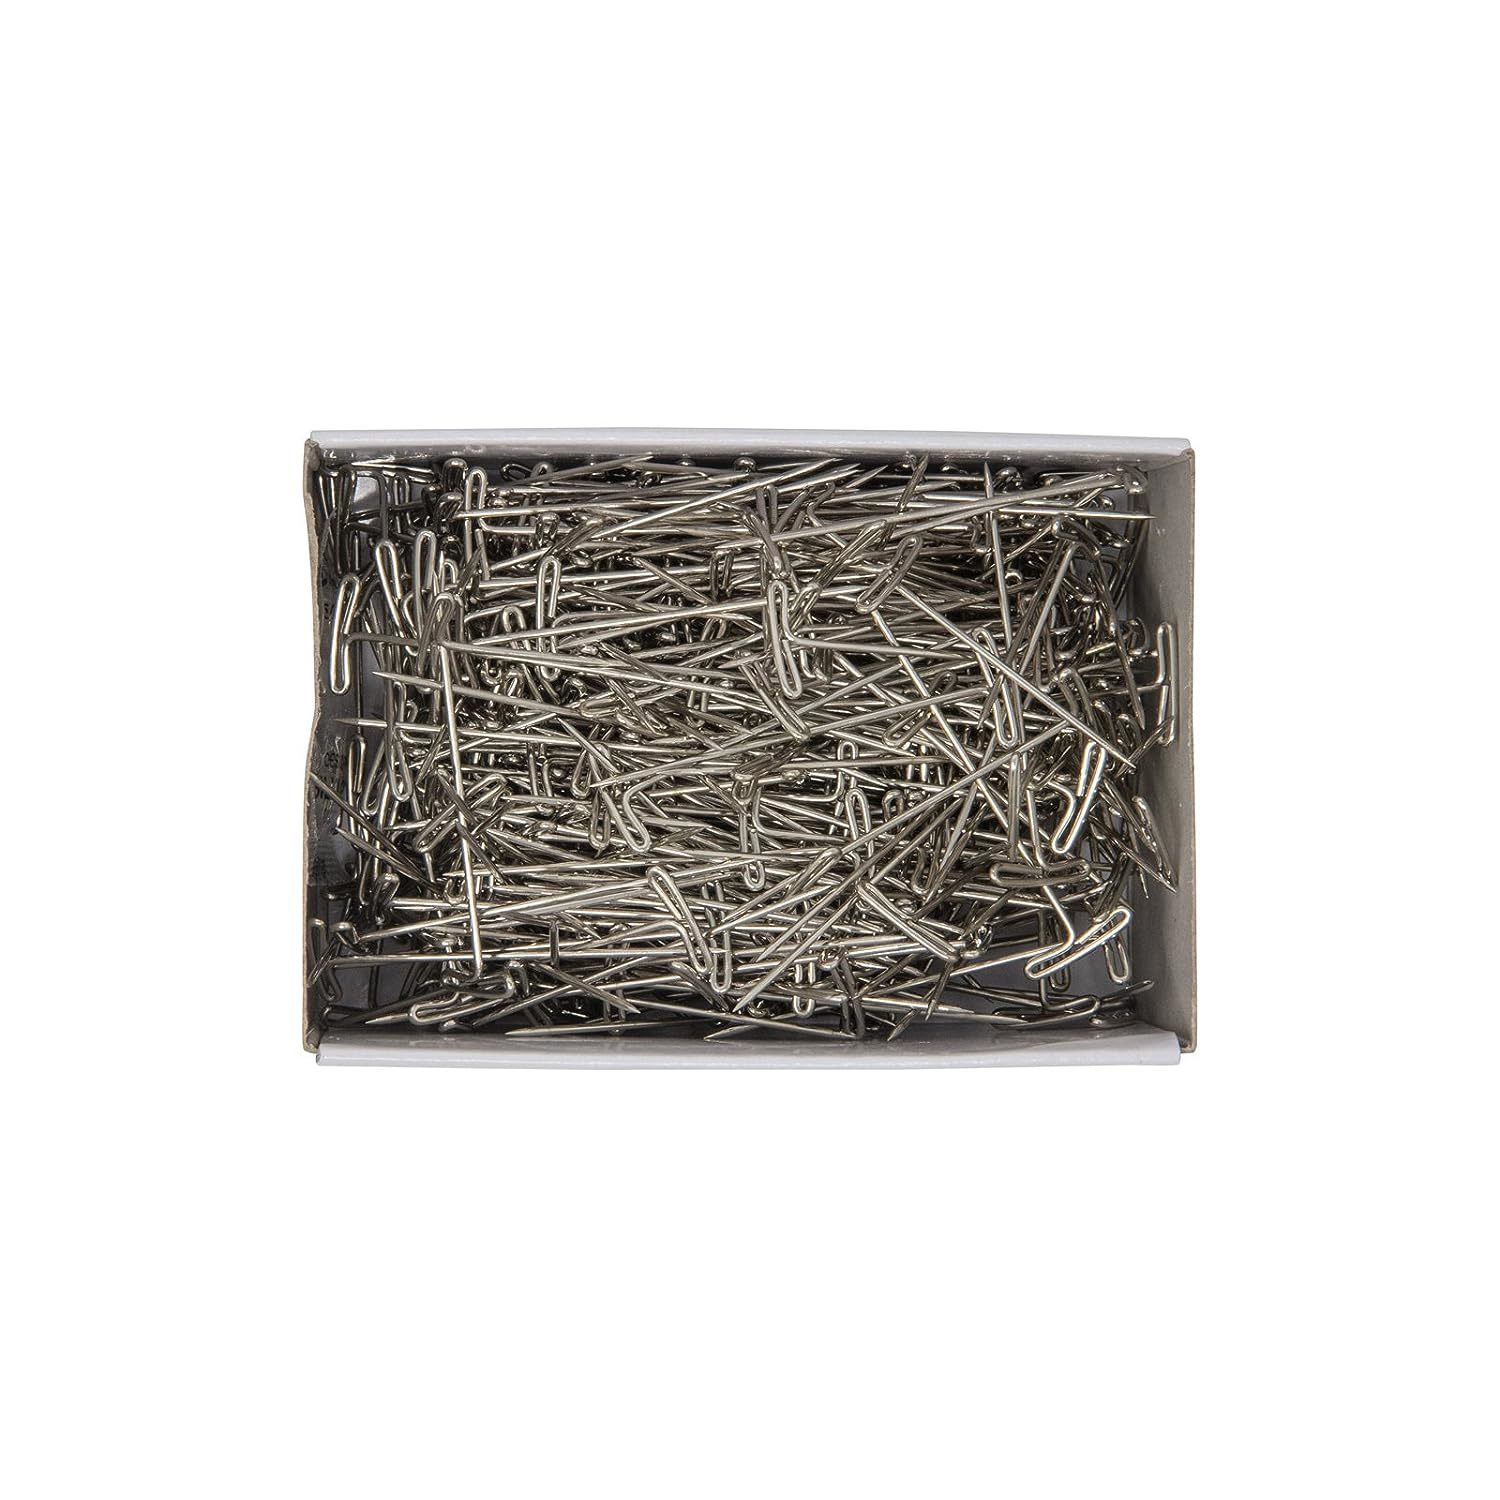  T Pins, Stainless Steel T-pins - Nickel Plated - 300 Pcs (2  Inch) : Office Products